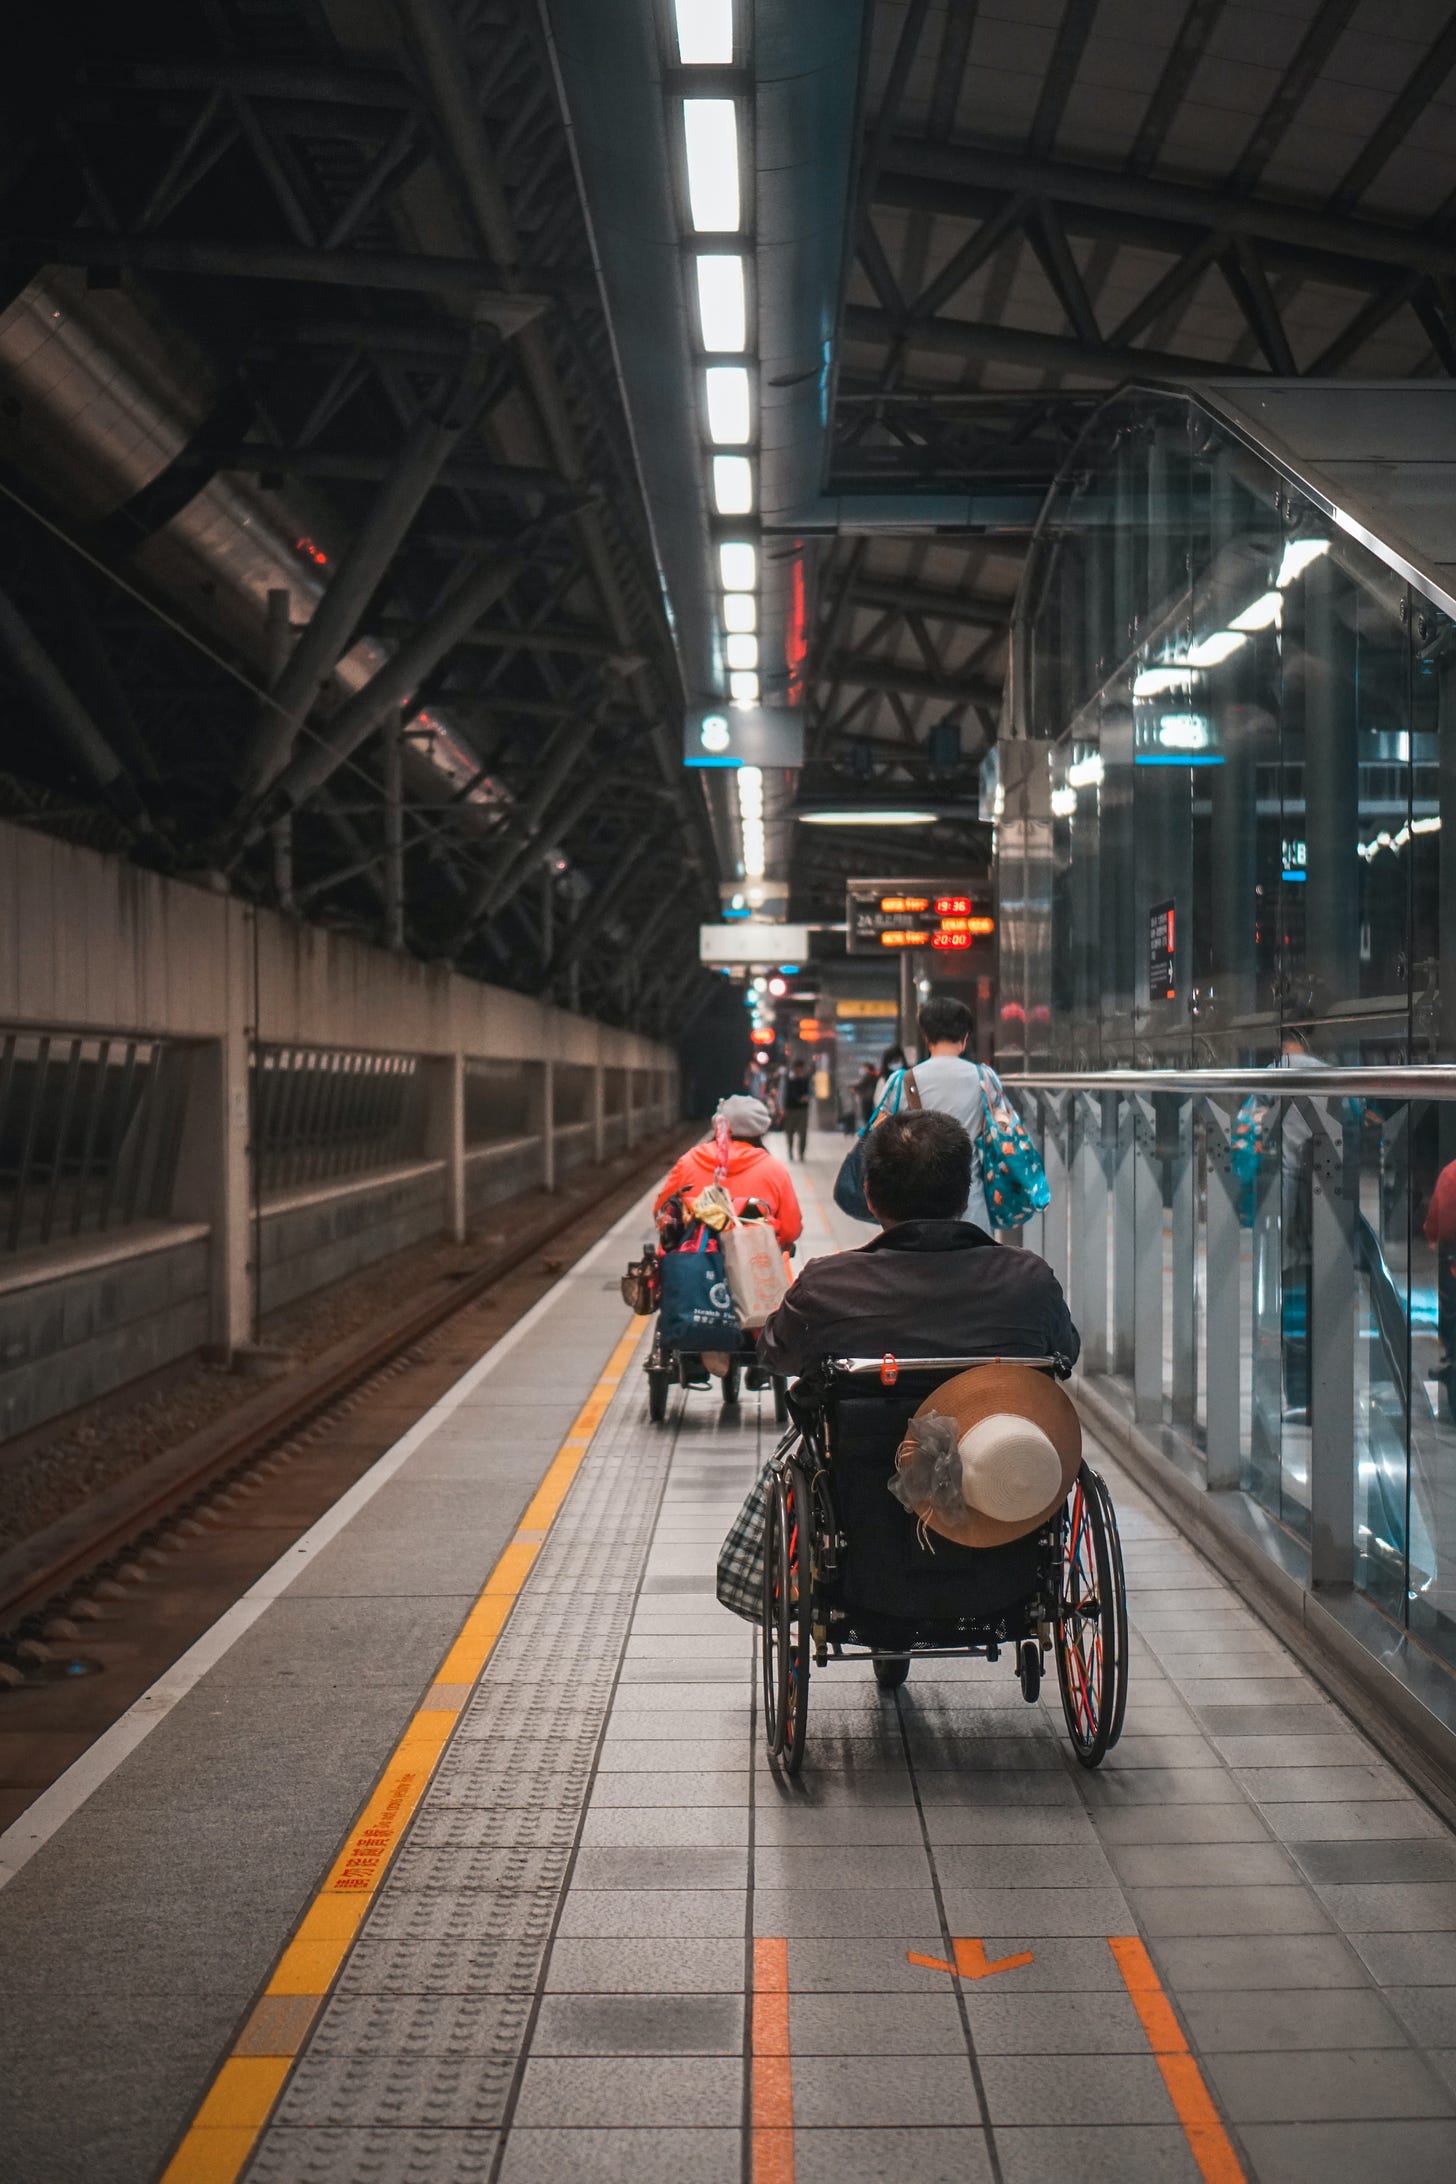 Picture of a train platform with a couple of people in wheelchairs with their backs to the camera making their way down the platform .